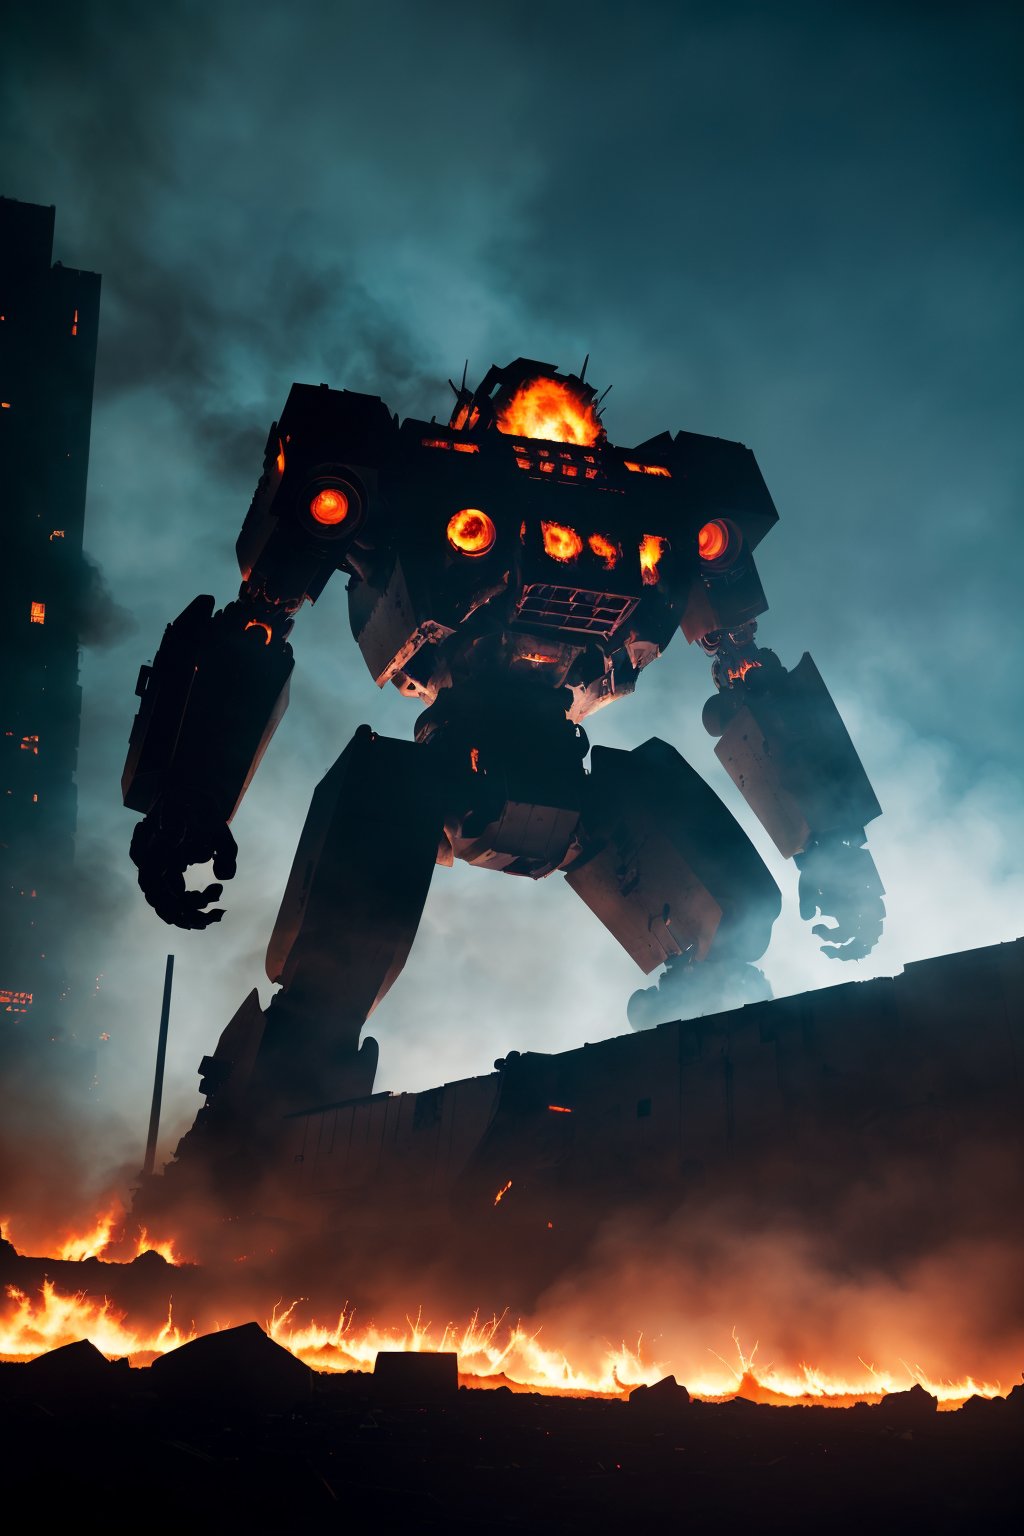 (raw photo, morbid horror:1.2), (a giant battle cyborg:1.1), angry, fullmetal, robotic, mechanical parts, (burning city background:1.2), slate atmosphere, cinematic, dimmed colors, dark shot, muted colors, film grainy, lut, spooky